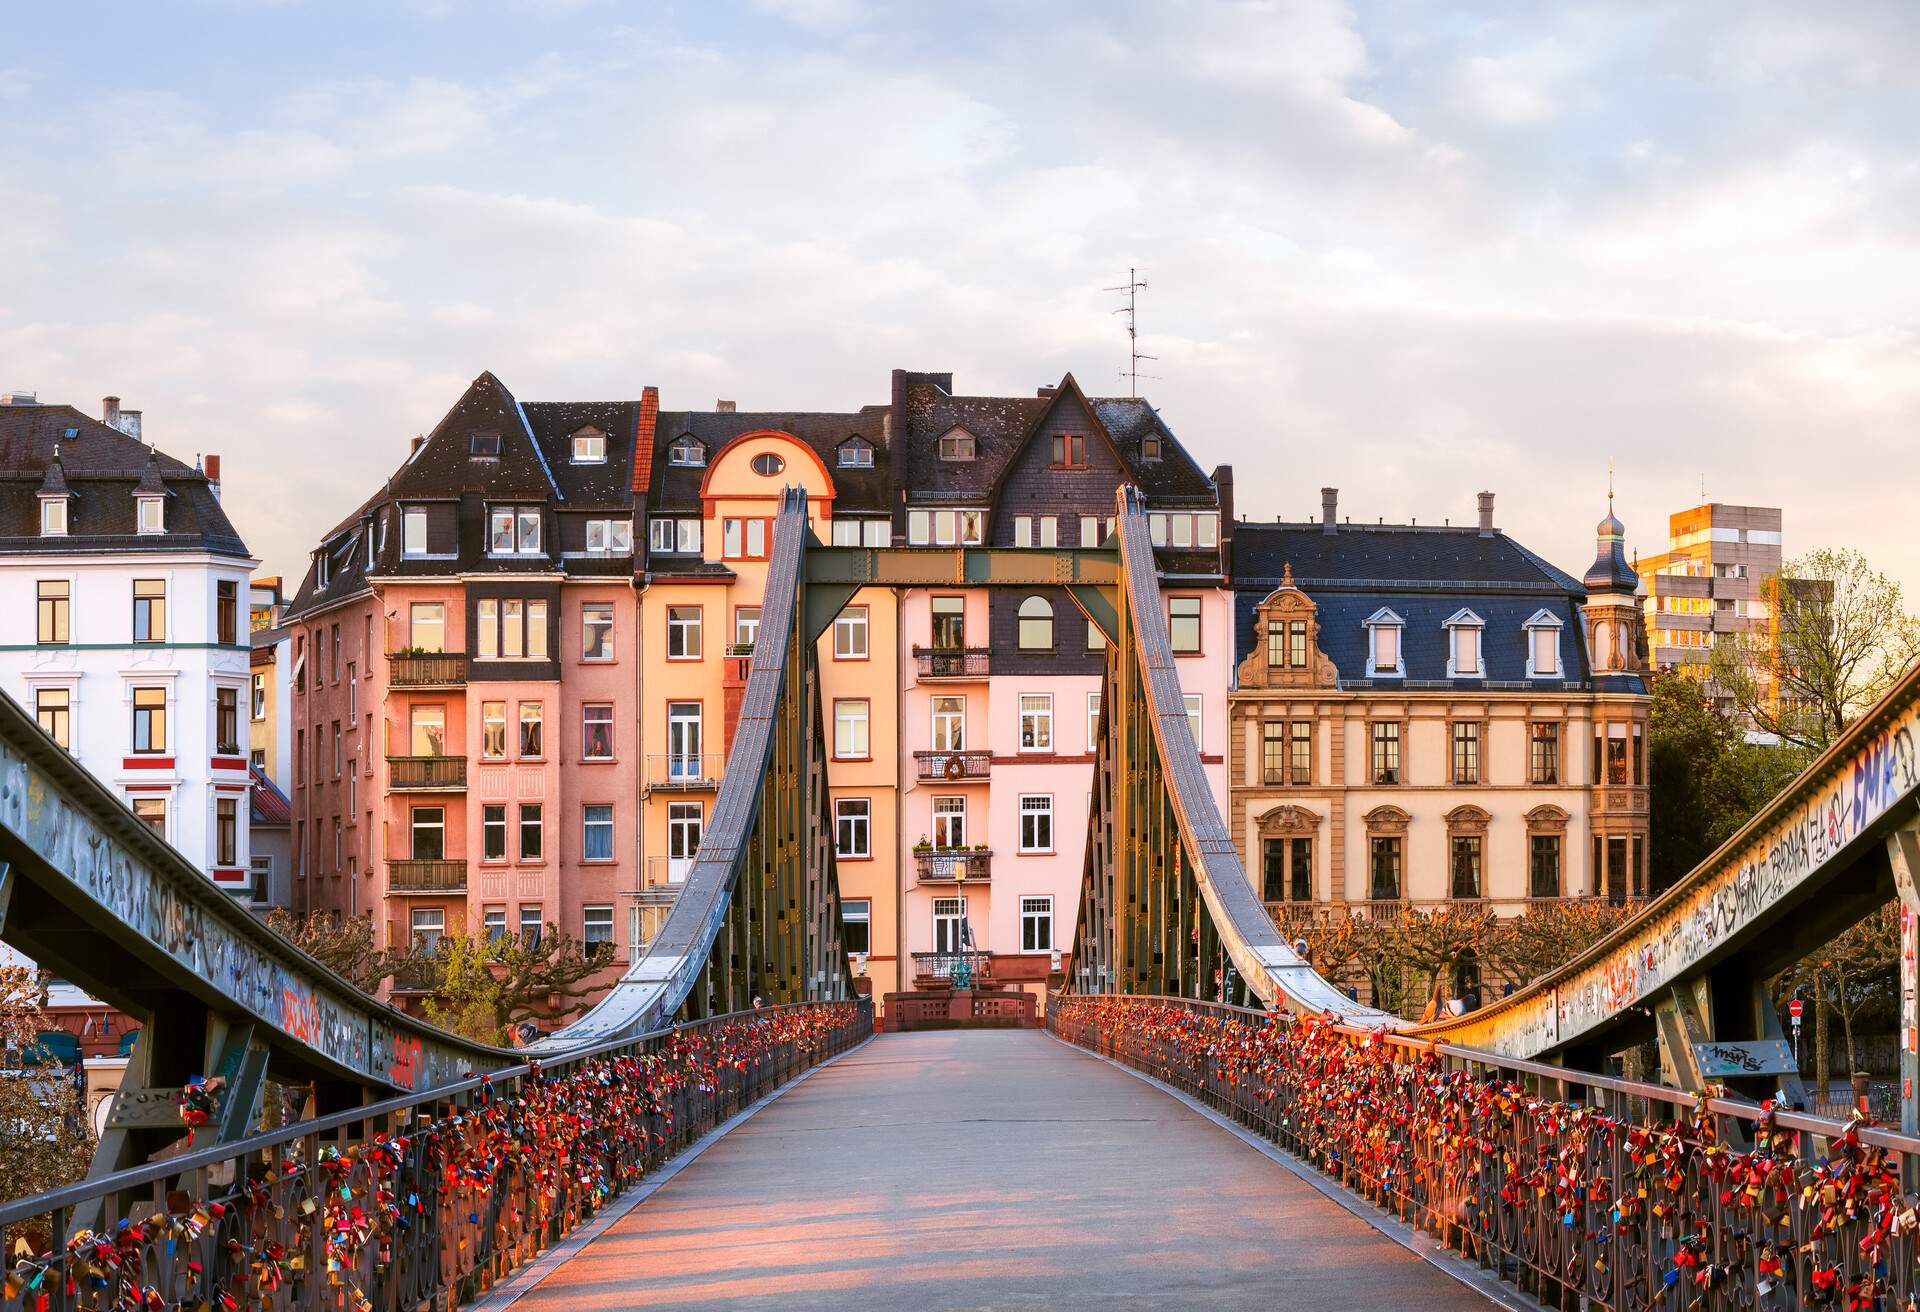 The Eiserner Steg (Iron Bridge), Frankfurt, Hessen, Germany - The footbridge crosses the River Main, it connects the centre of Frankfurt with the district of Sachsenhausen (built in 1868). The bridge was blown up in the final days of WWII, but was rebuilt shortly afterwards.